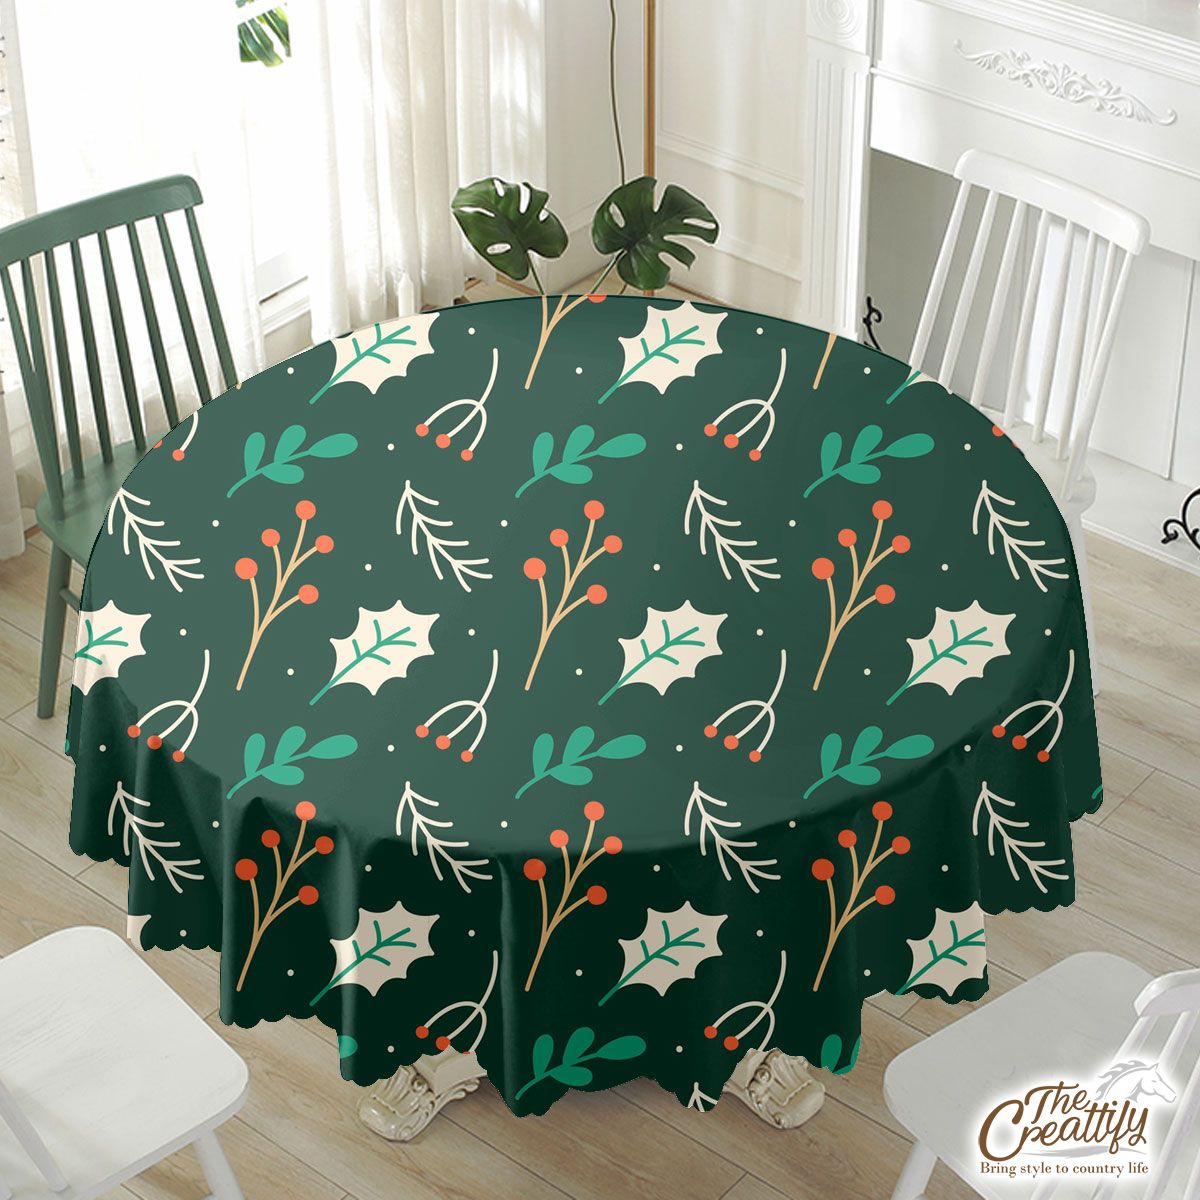 Red Berries And Holly Leaf Pattern Waterproof Tablecloth